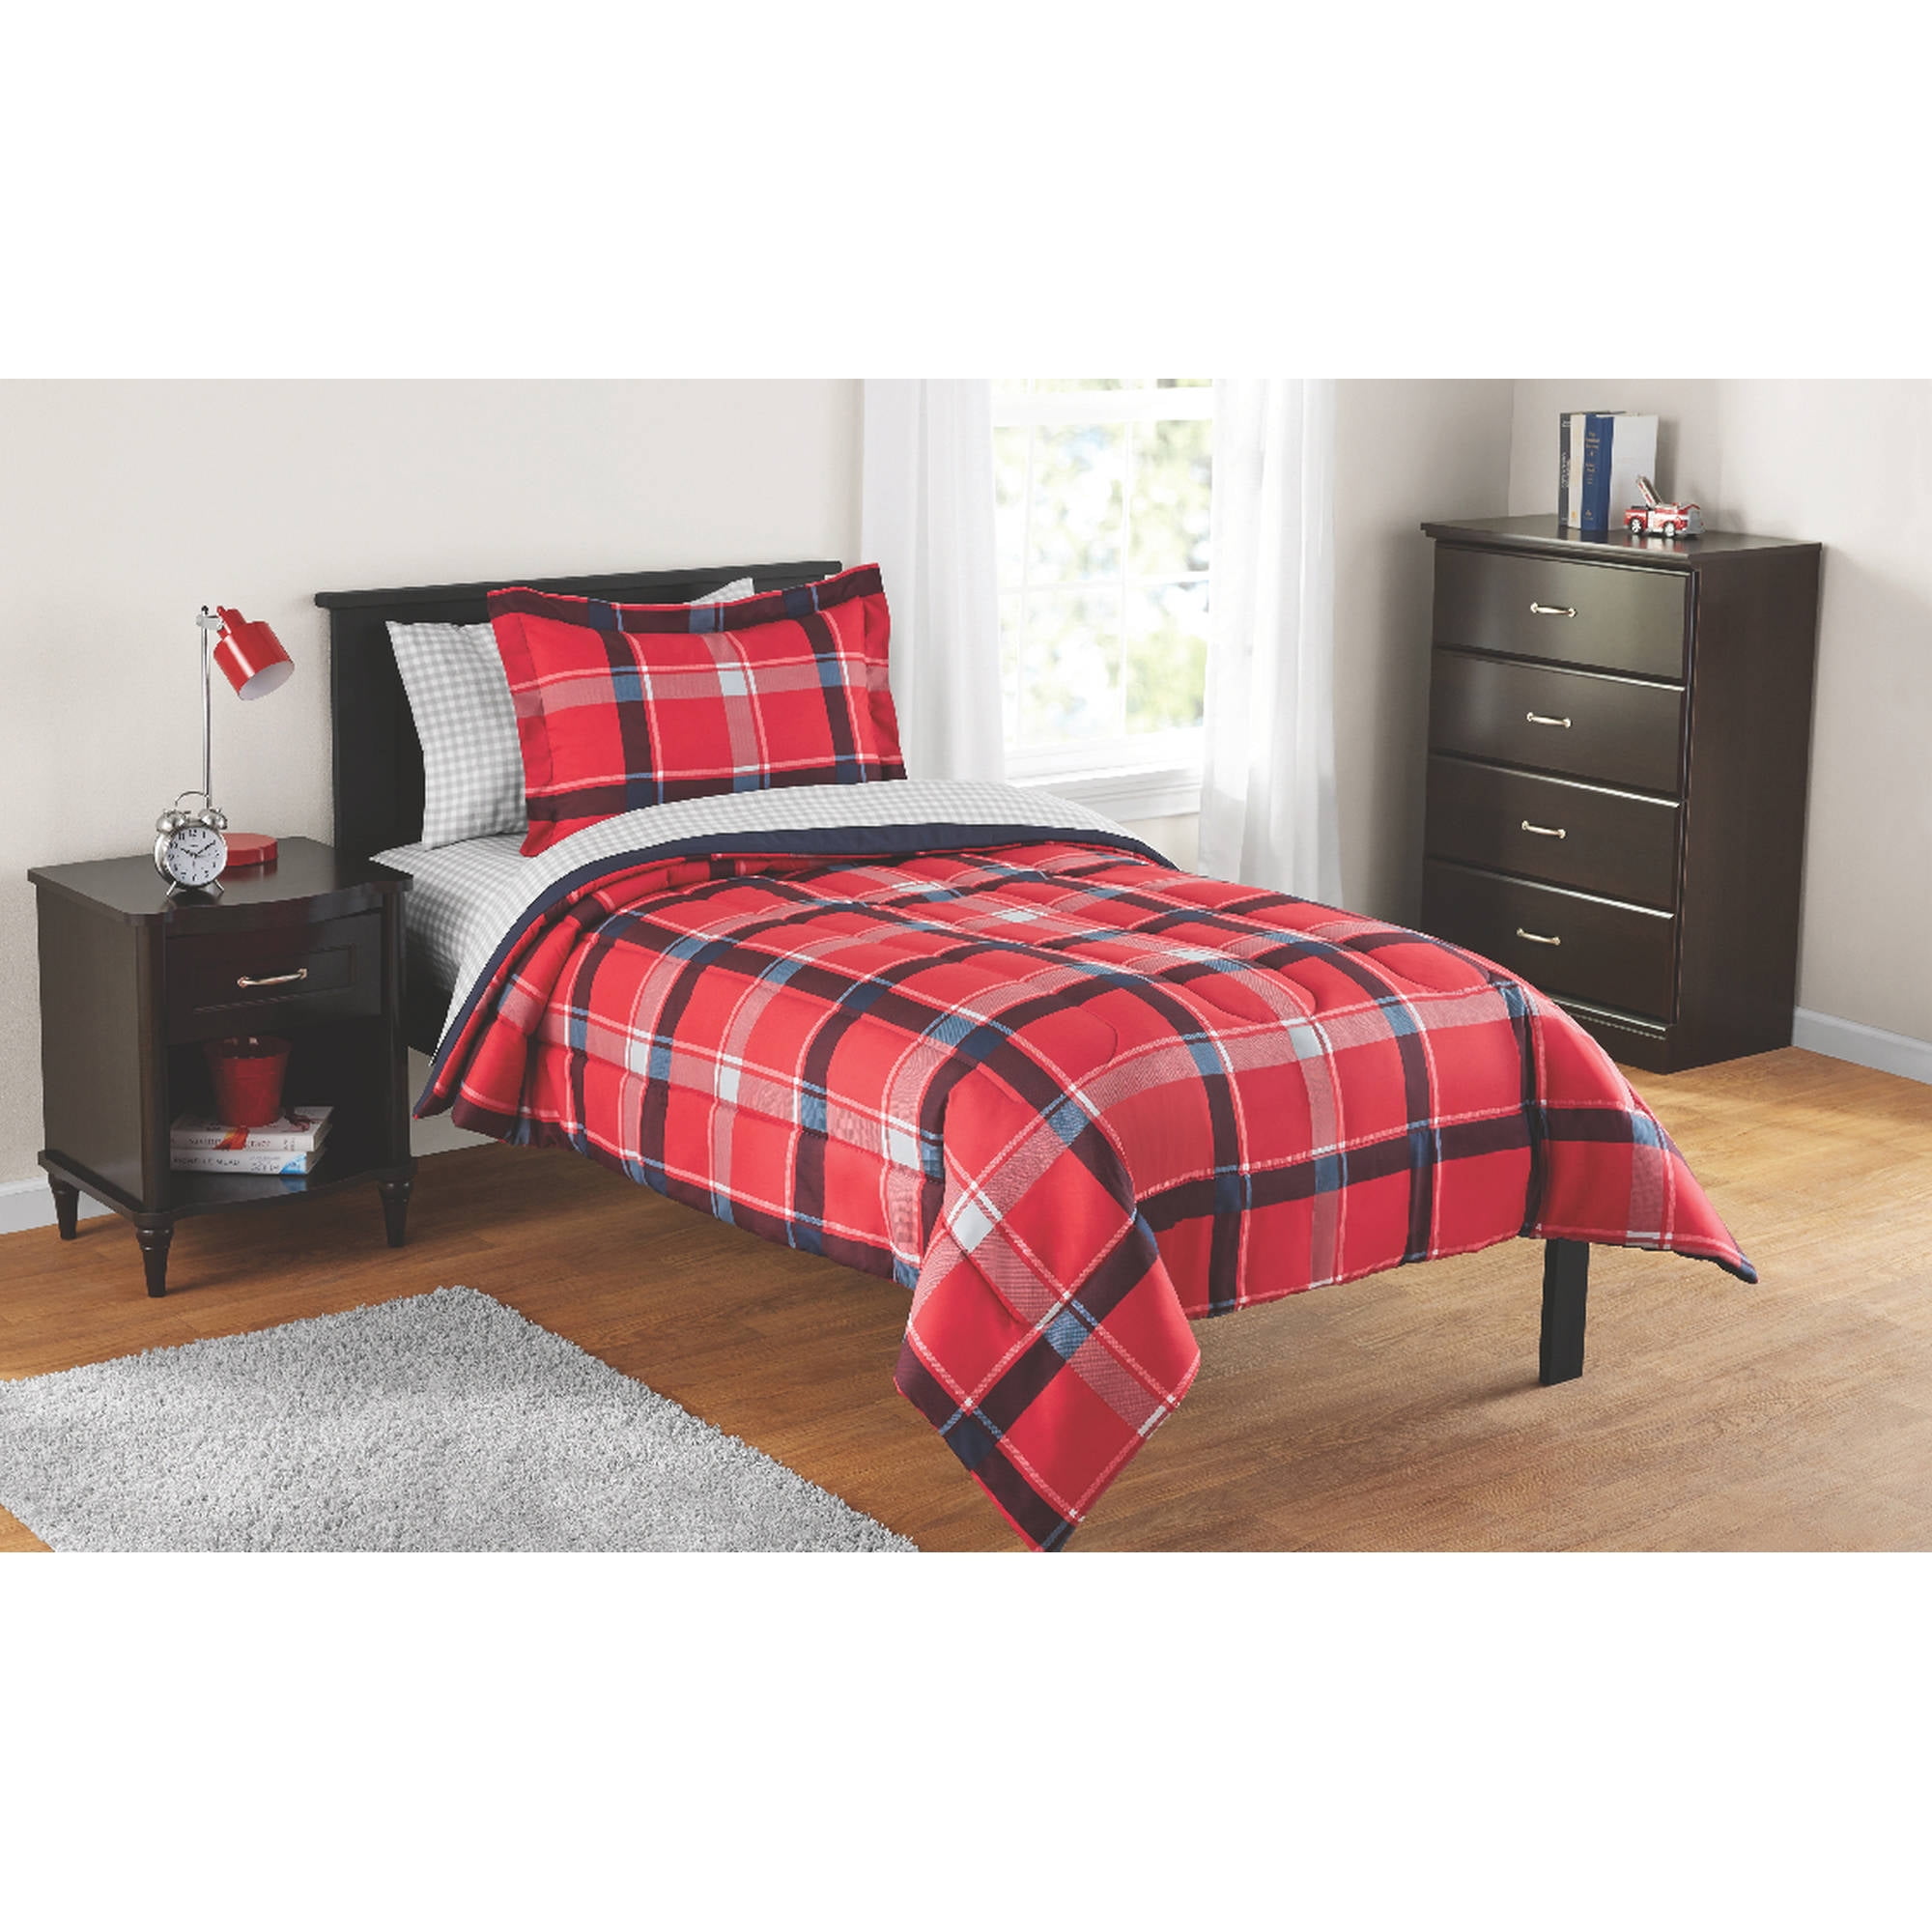 image: Mainstays Kids Red Plaid Bed in a Bag Complete Bedding Set